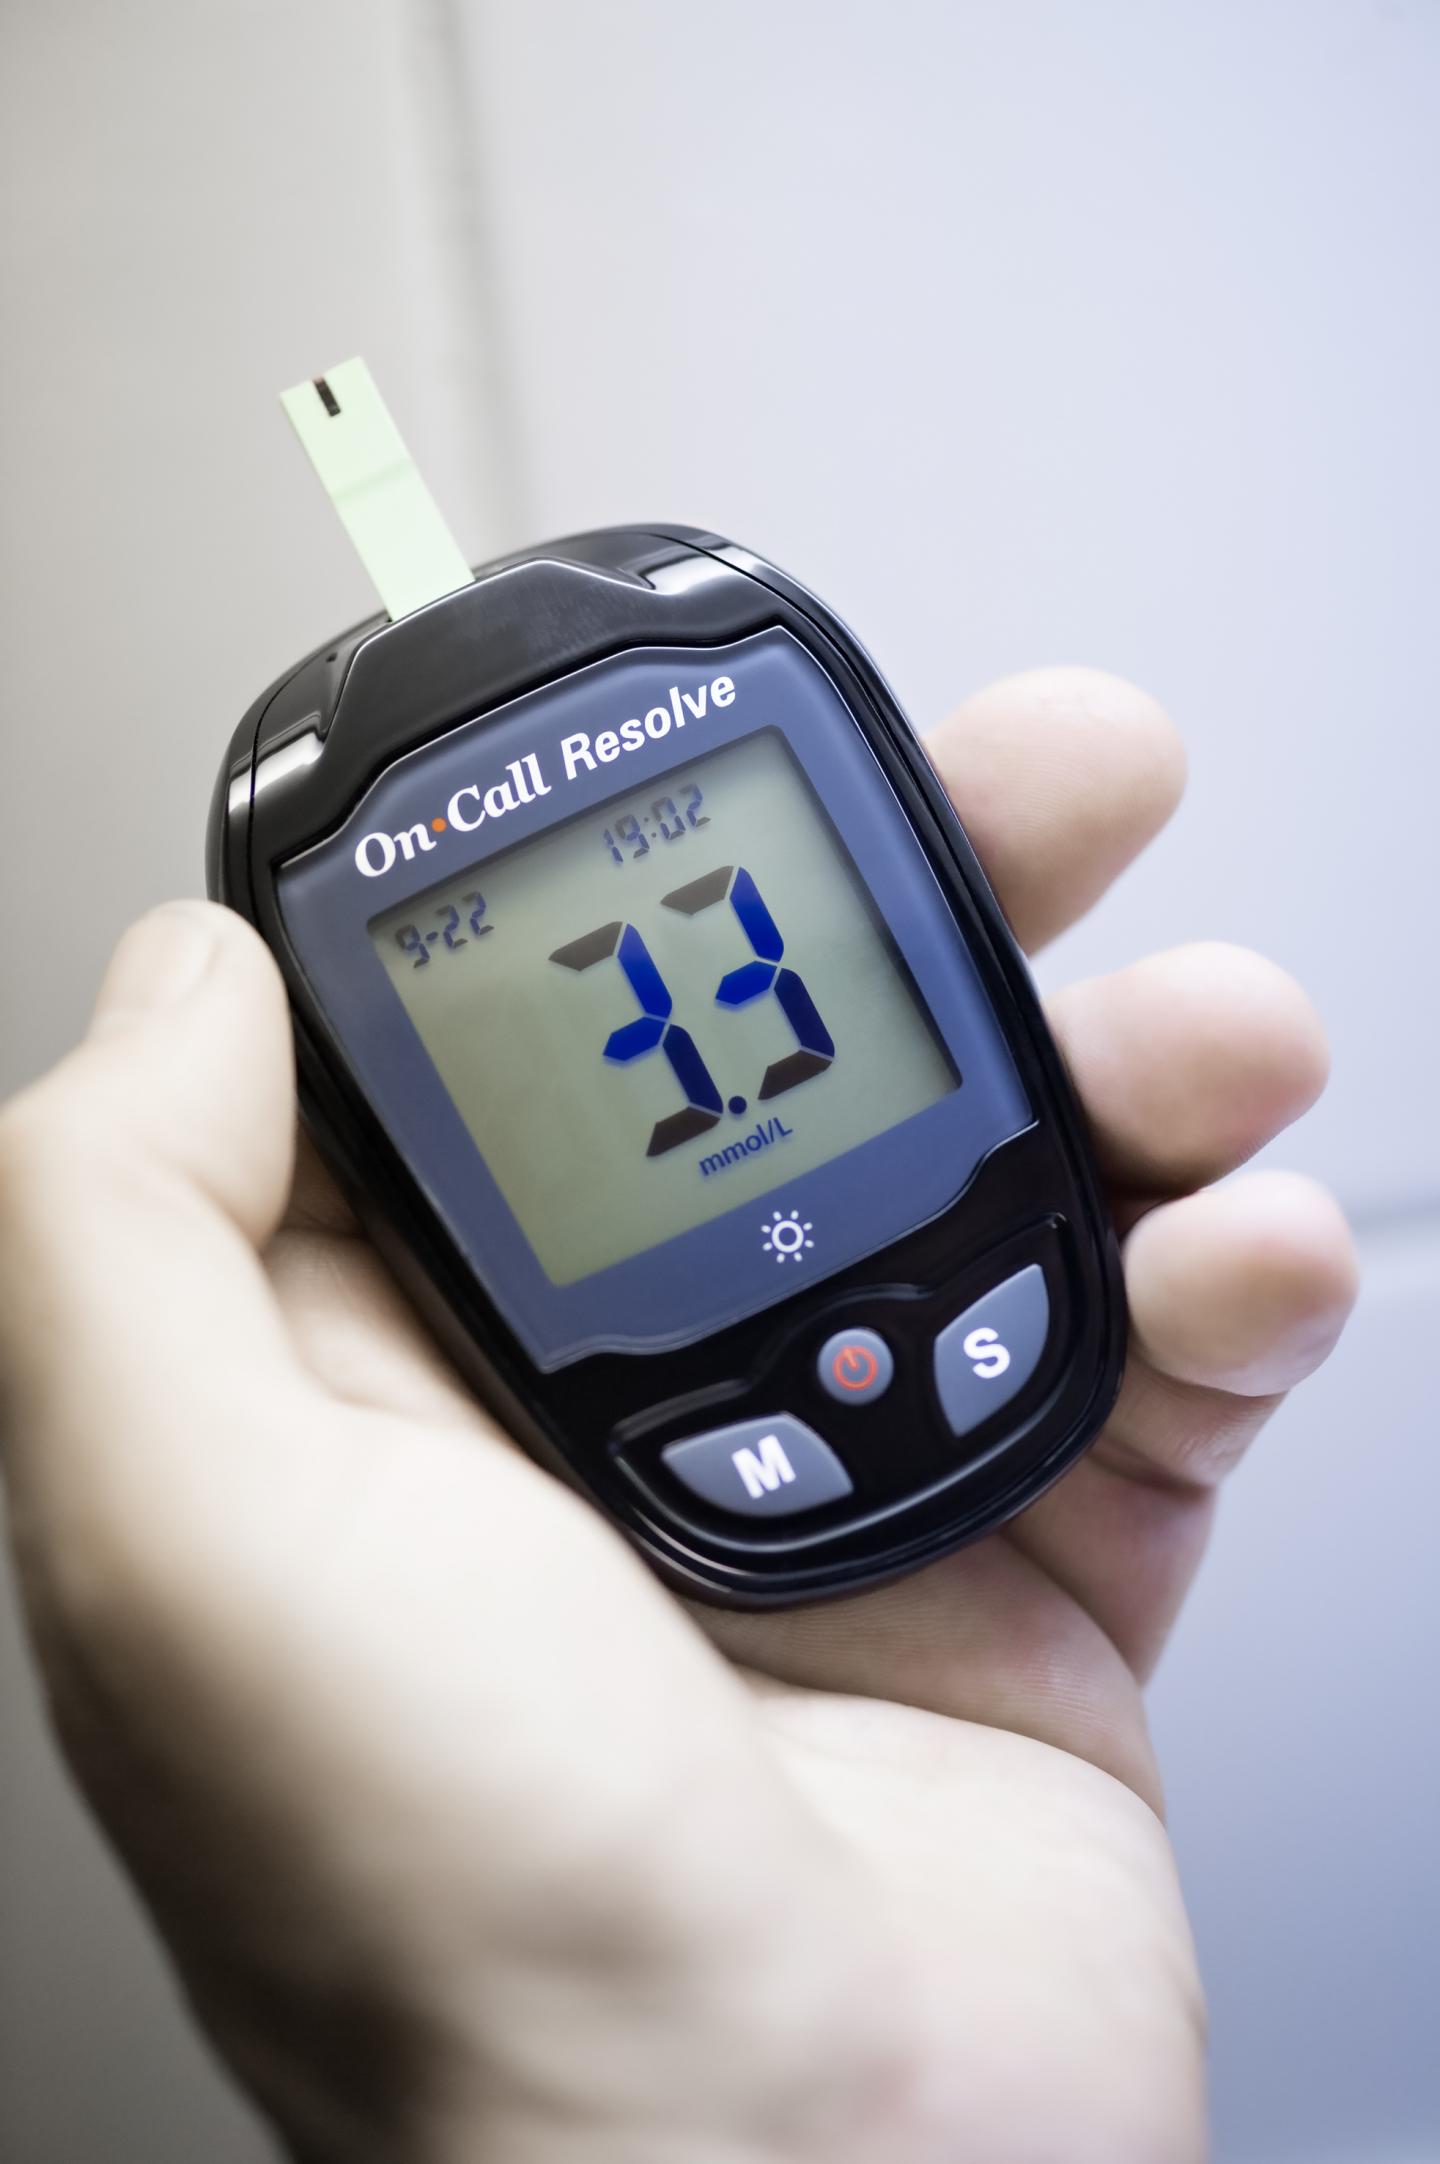 Self-Monitoring of Type 2 Diabetes Reduces Follow-Up Costs by More Than Half